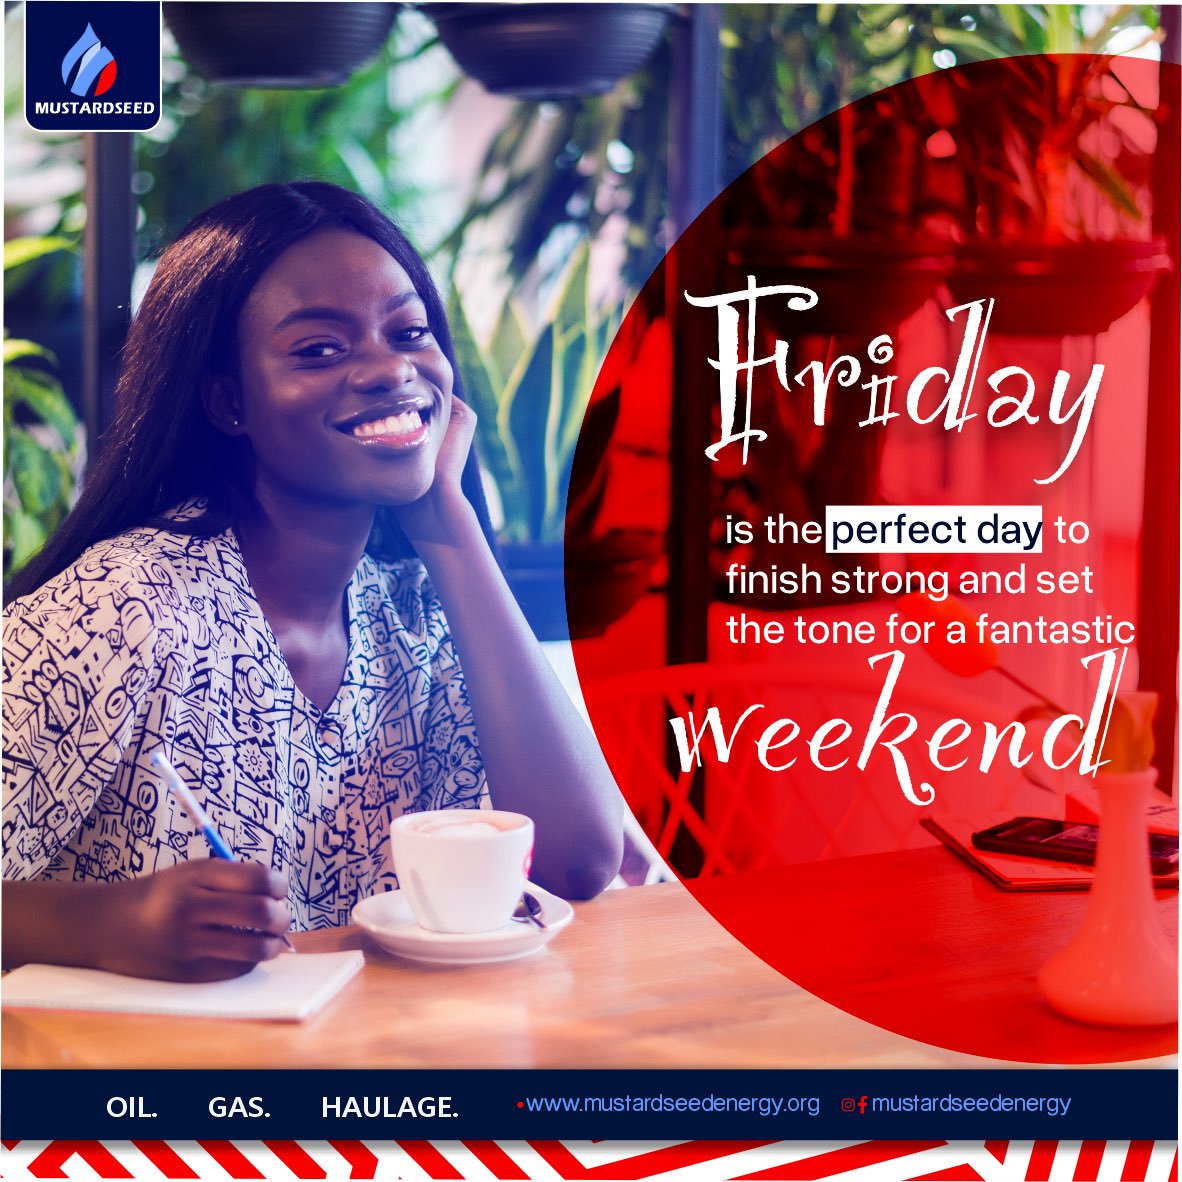 The only limits in life are the ones you make. Wake up and be awesome.
Every weekend should be a time of love and fun.
#TGIF 
#perfectweekend
#mustardseedenergydynamics